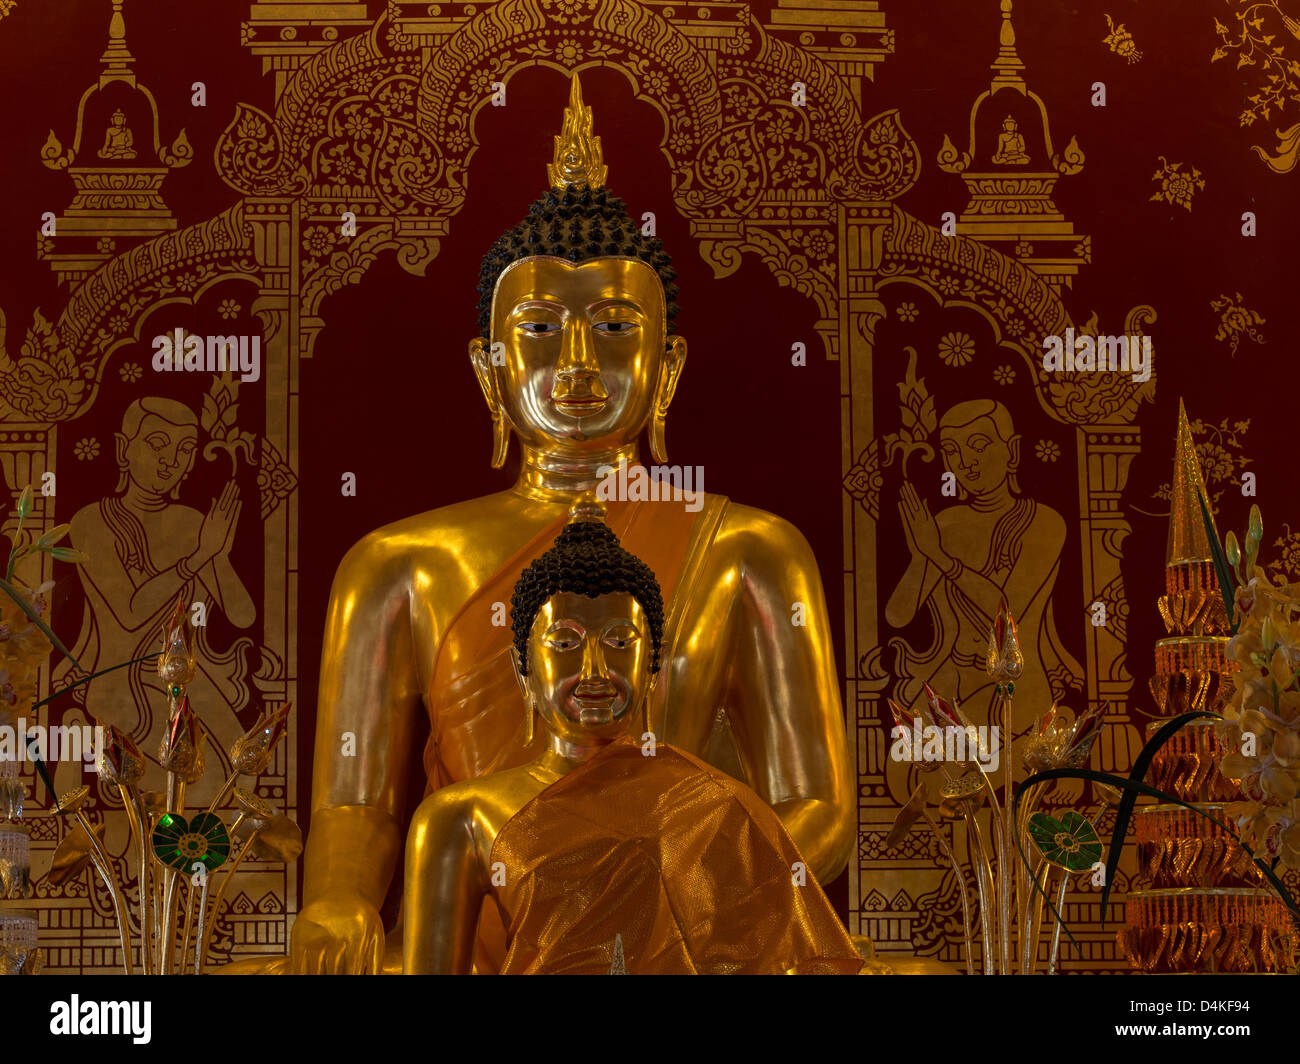 Golden Buddha statues against a ruby red background Stock Photo